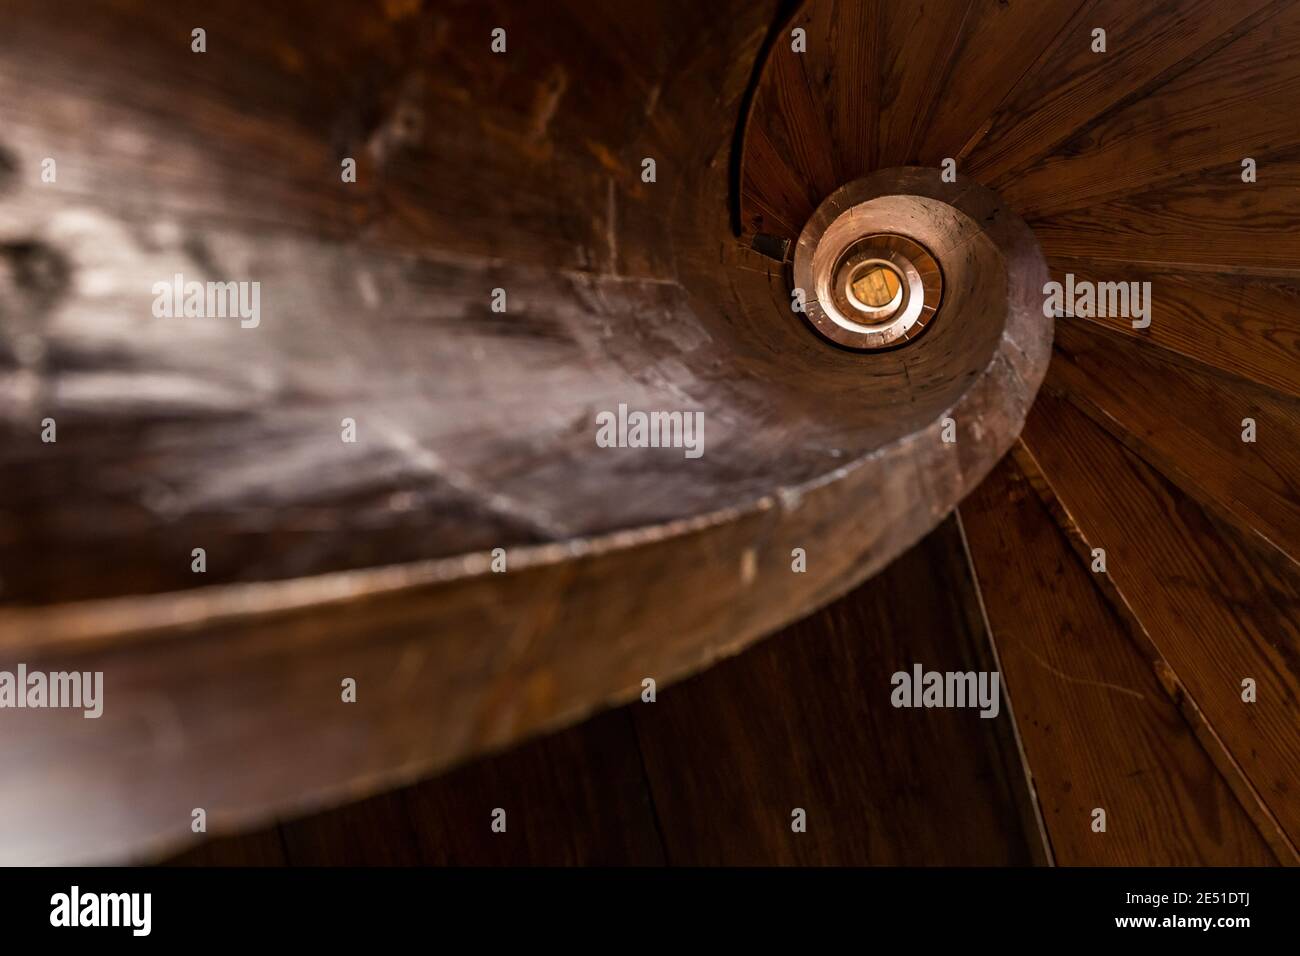 Close up of the stairwell of an ancient wooden spiral staircase Stock Photo